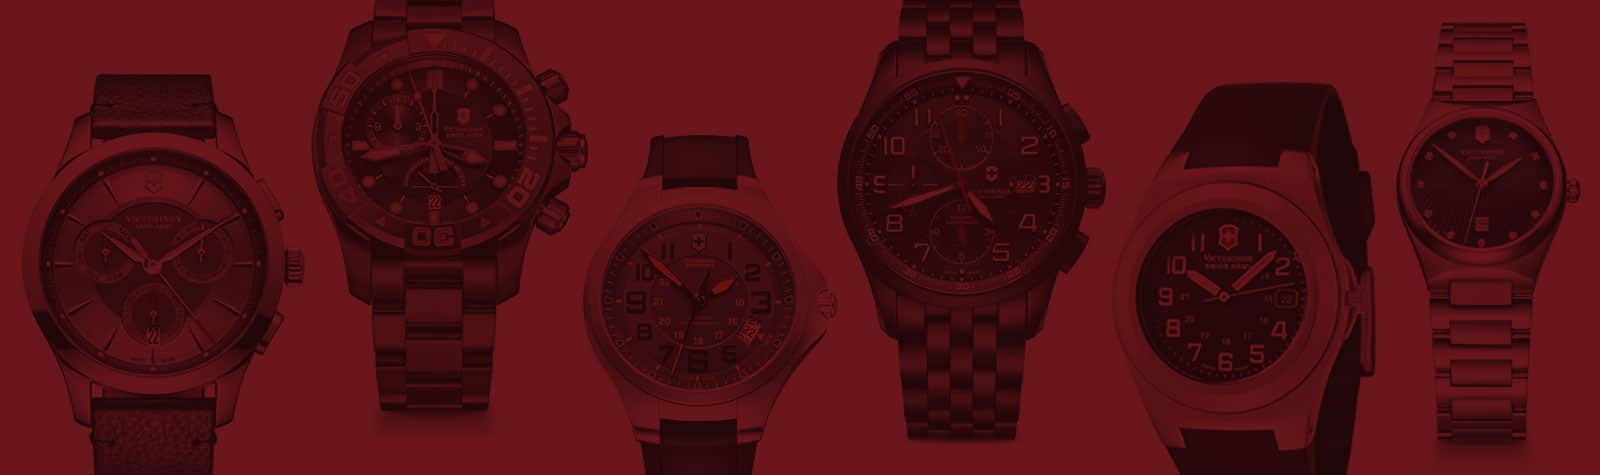 Introducing the Victorinox Swiss Army Watch Identifier and Model Database